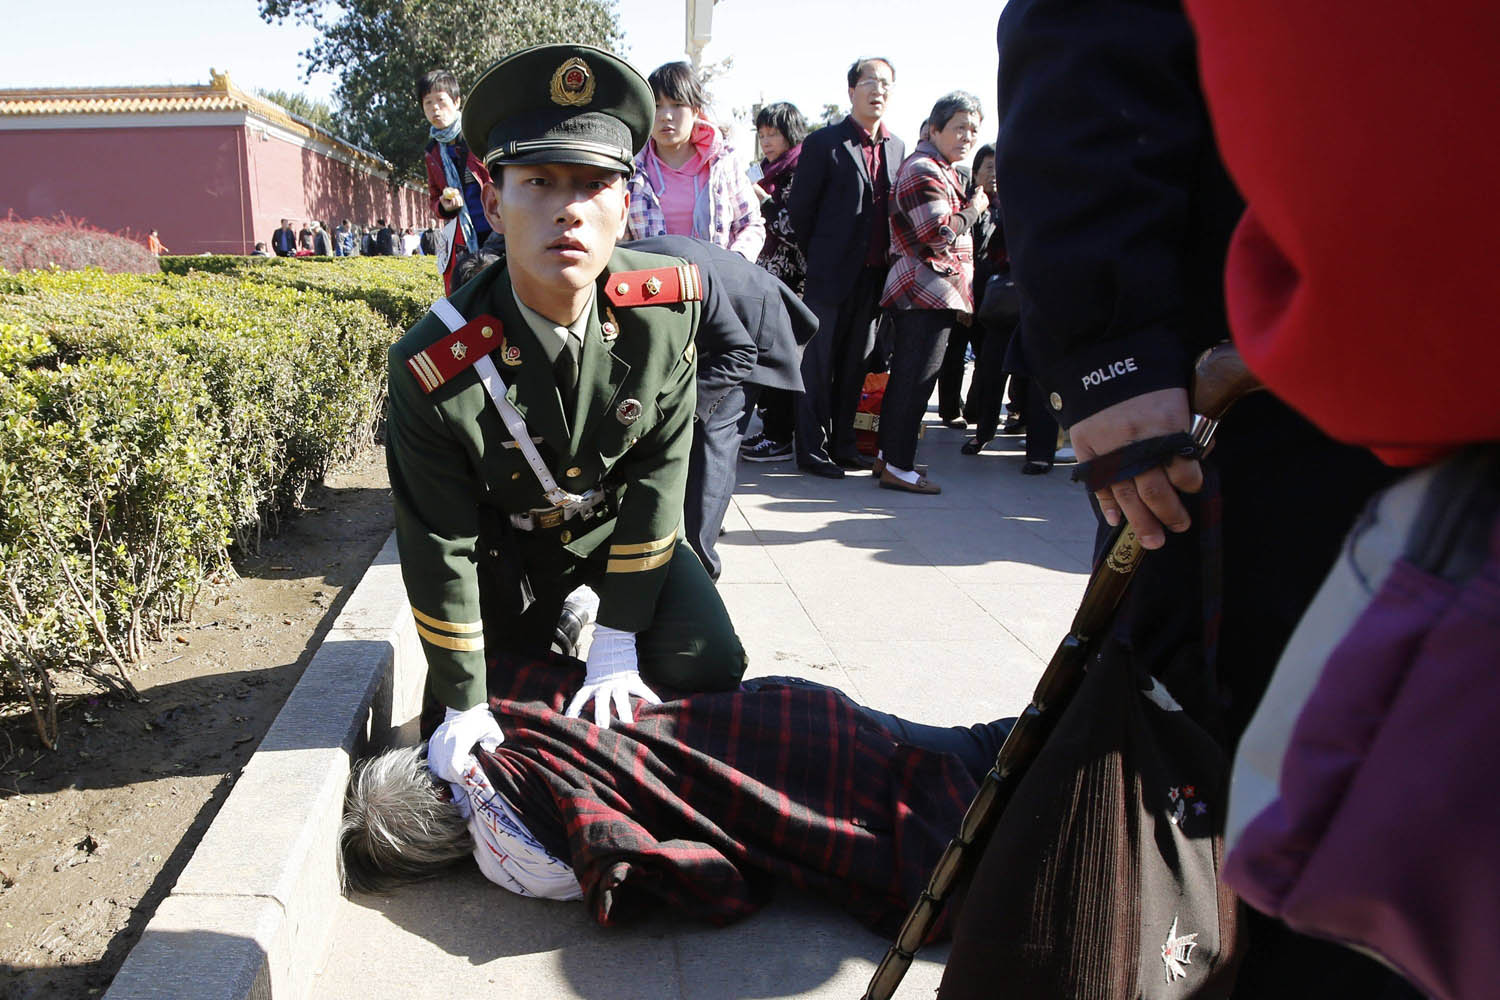 Oct. 29, 2013. A paramilitary policeman detains a woman who threw papers, believed to be her petition papers, near the main entrance of the Forbidden City in Beijing.